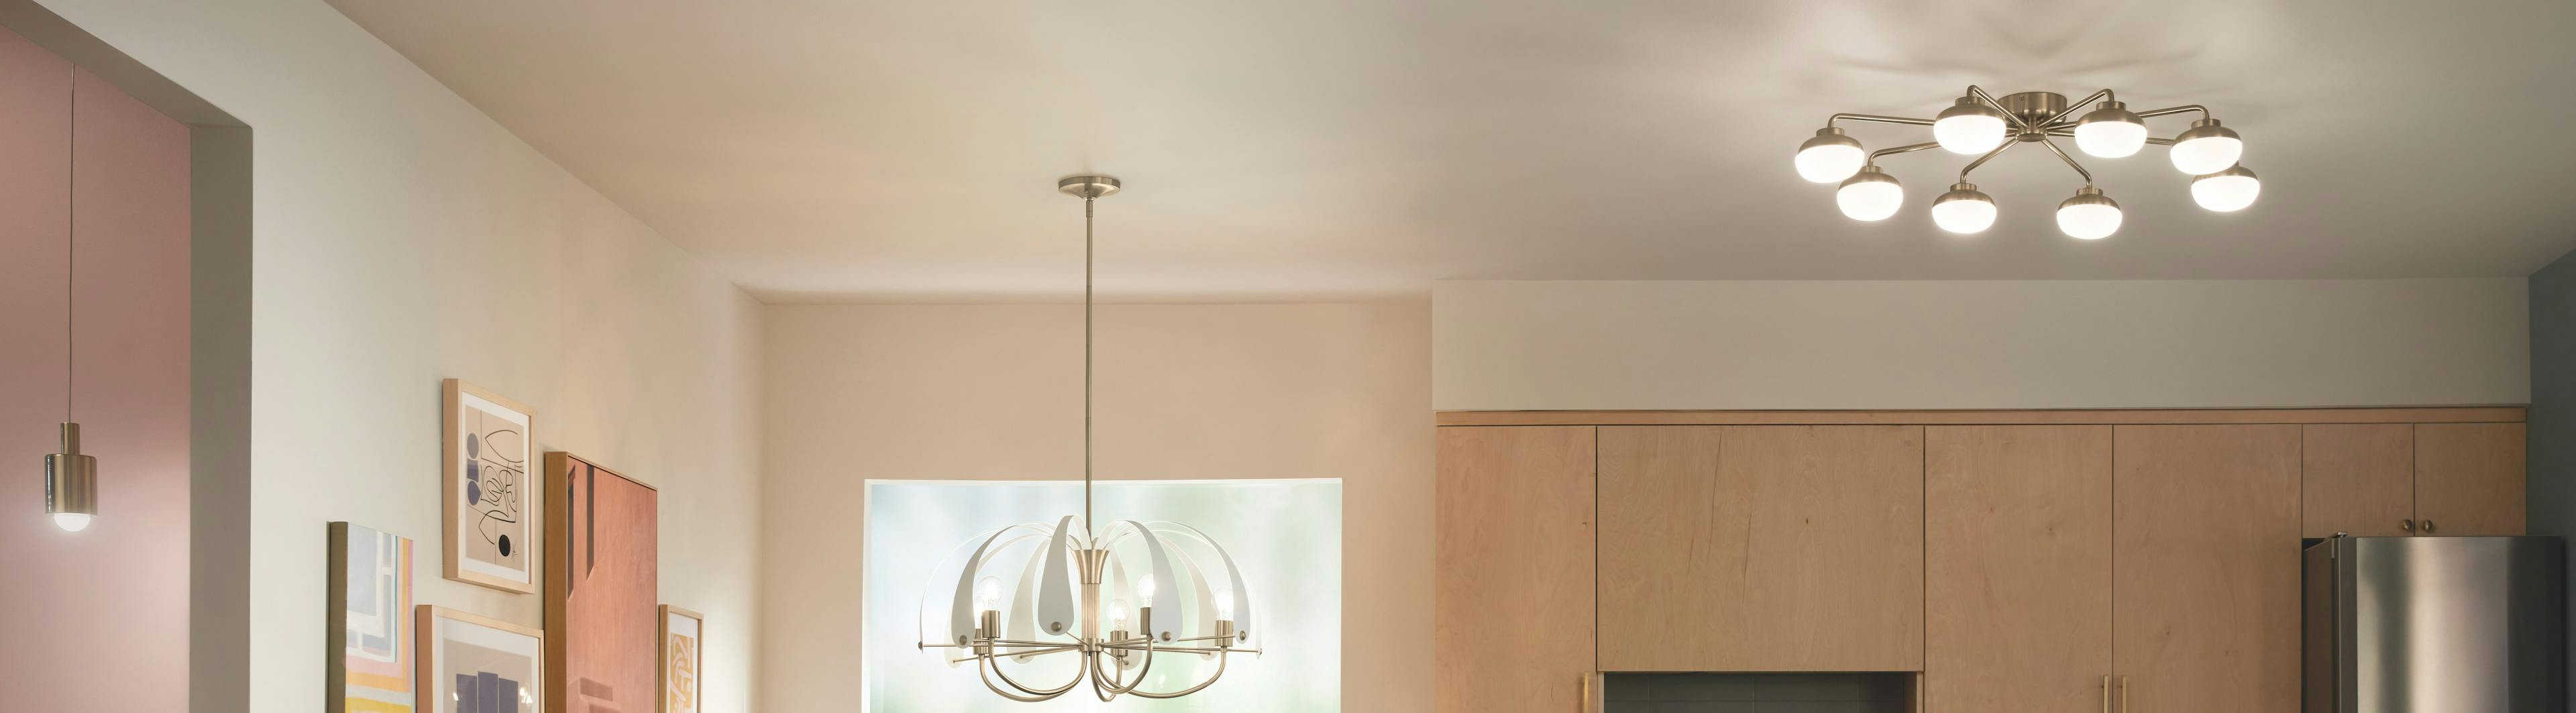 Modern kitchen with Remy 8-light flush mount like on a white ceiling and champagne bronze finish